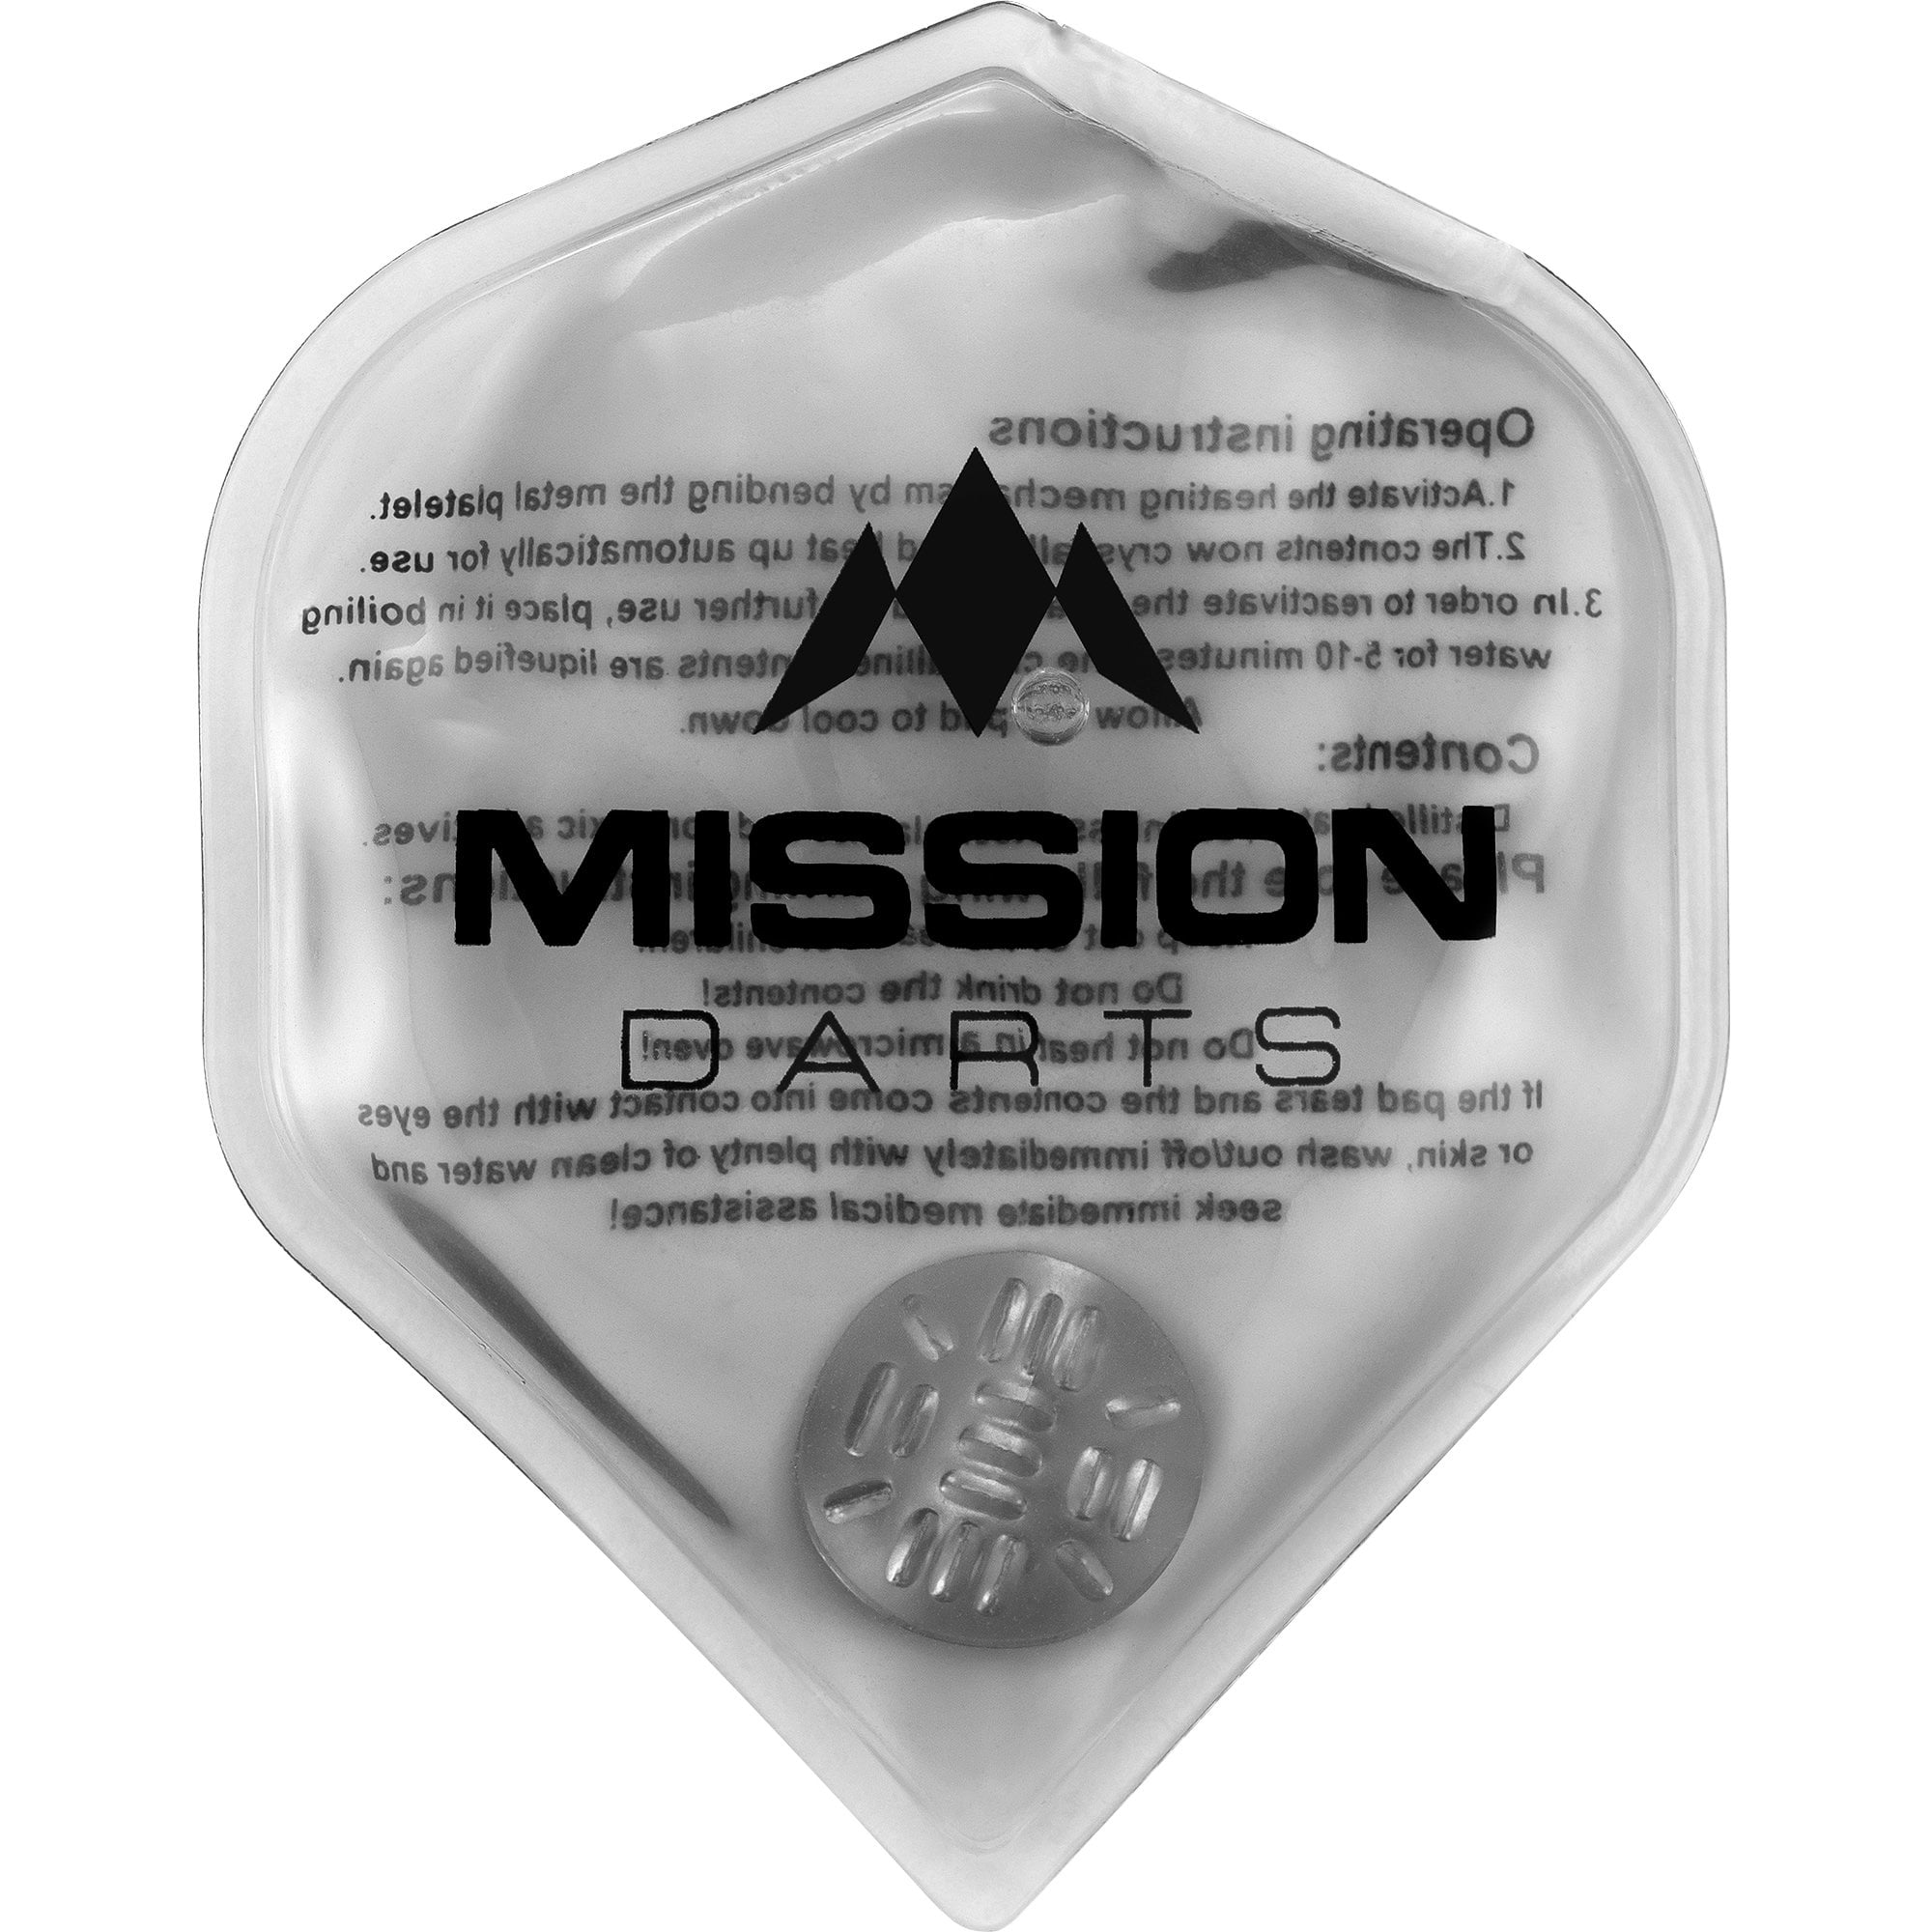 Mission Flux - Luxury Hand Warmer - Reusable